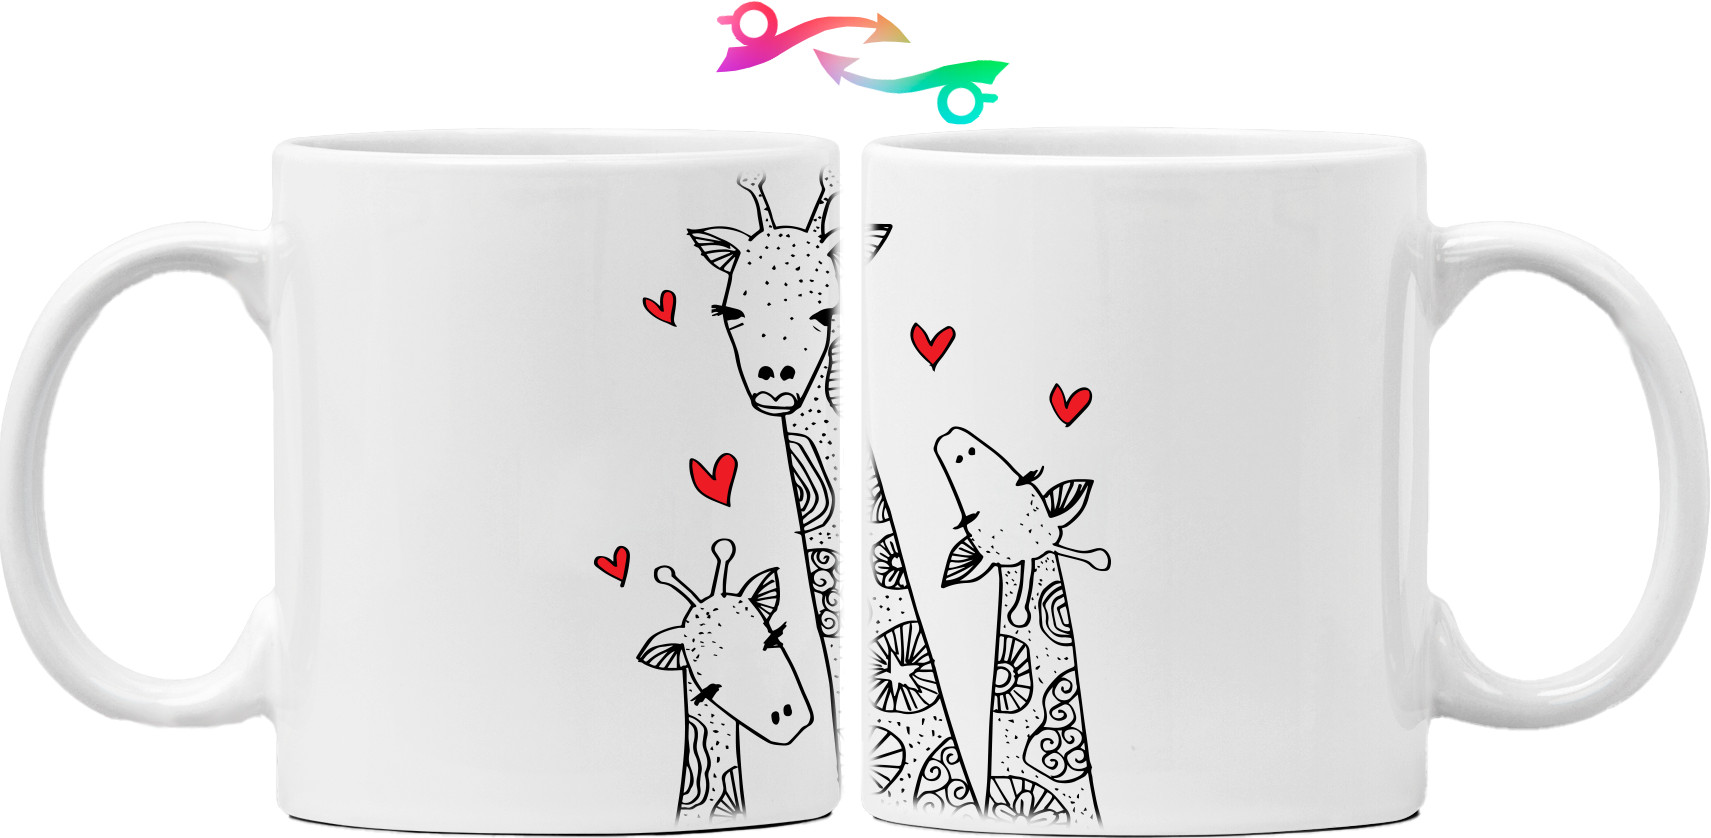 Favorite family of giraffes with hearts